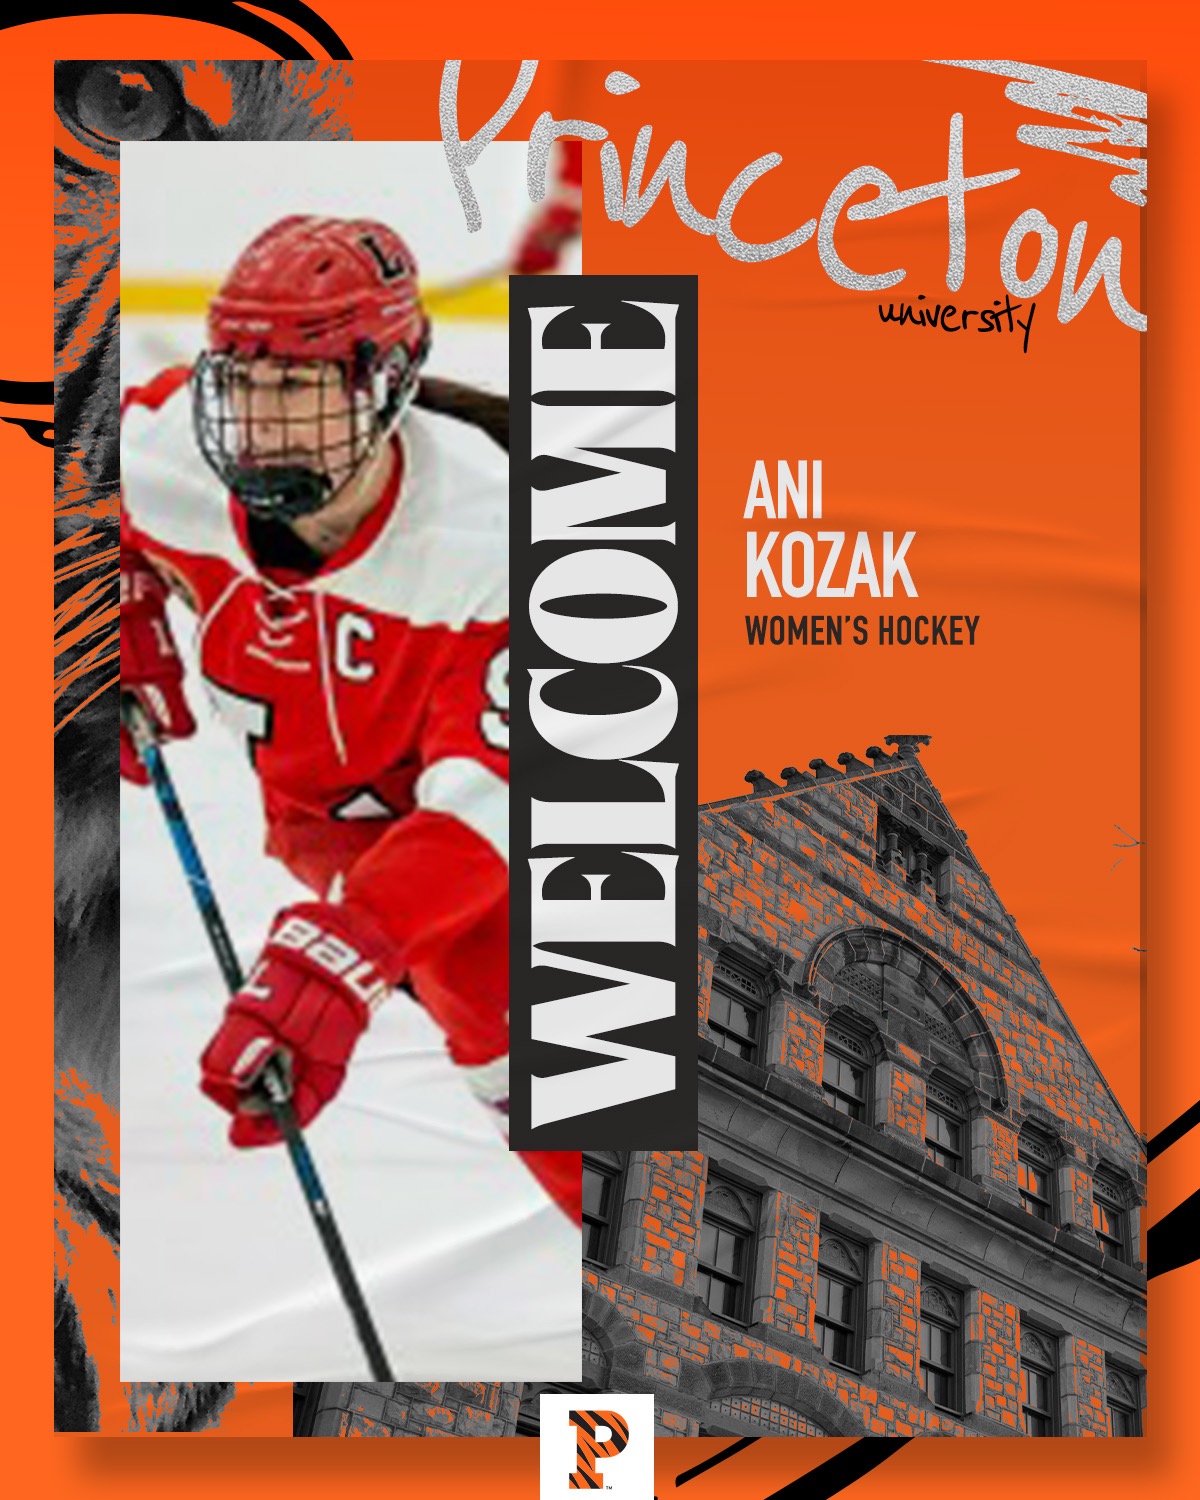 ani kozak welcome graphic with action photo